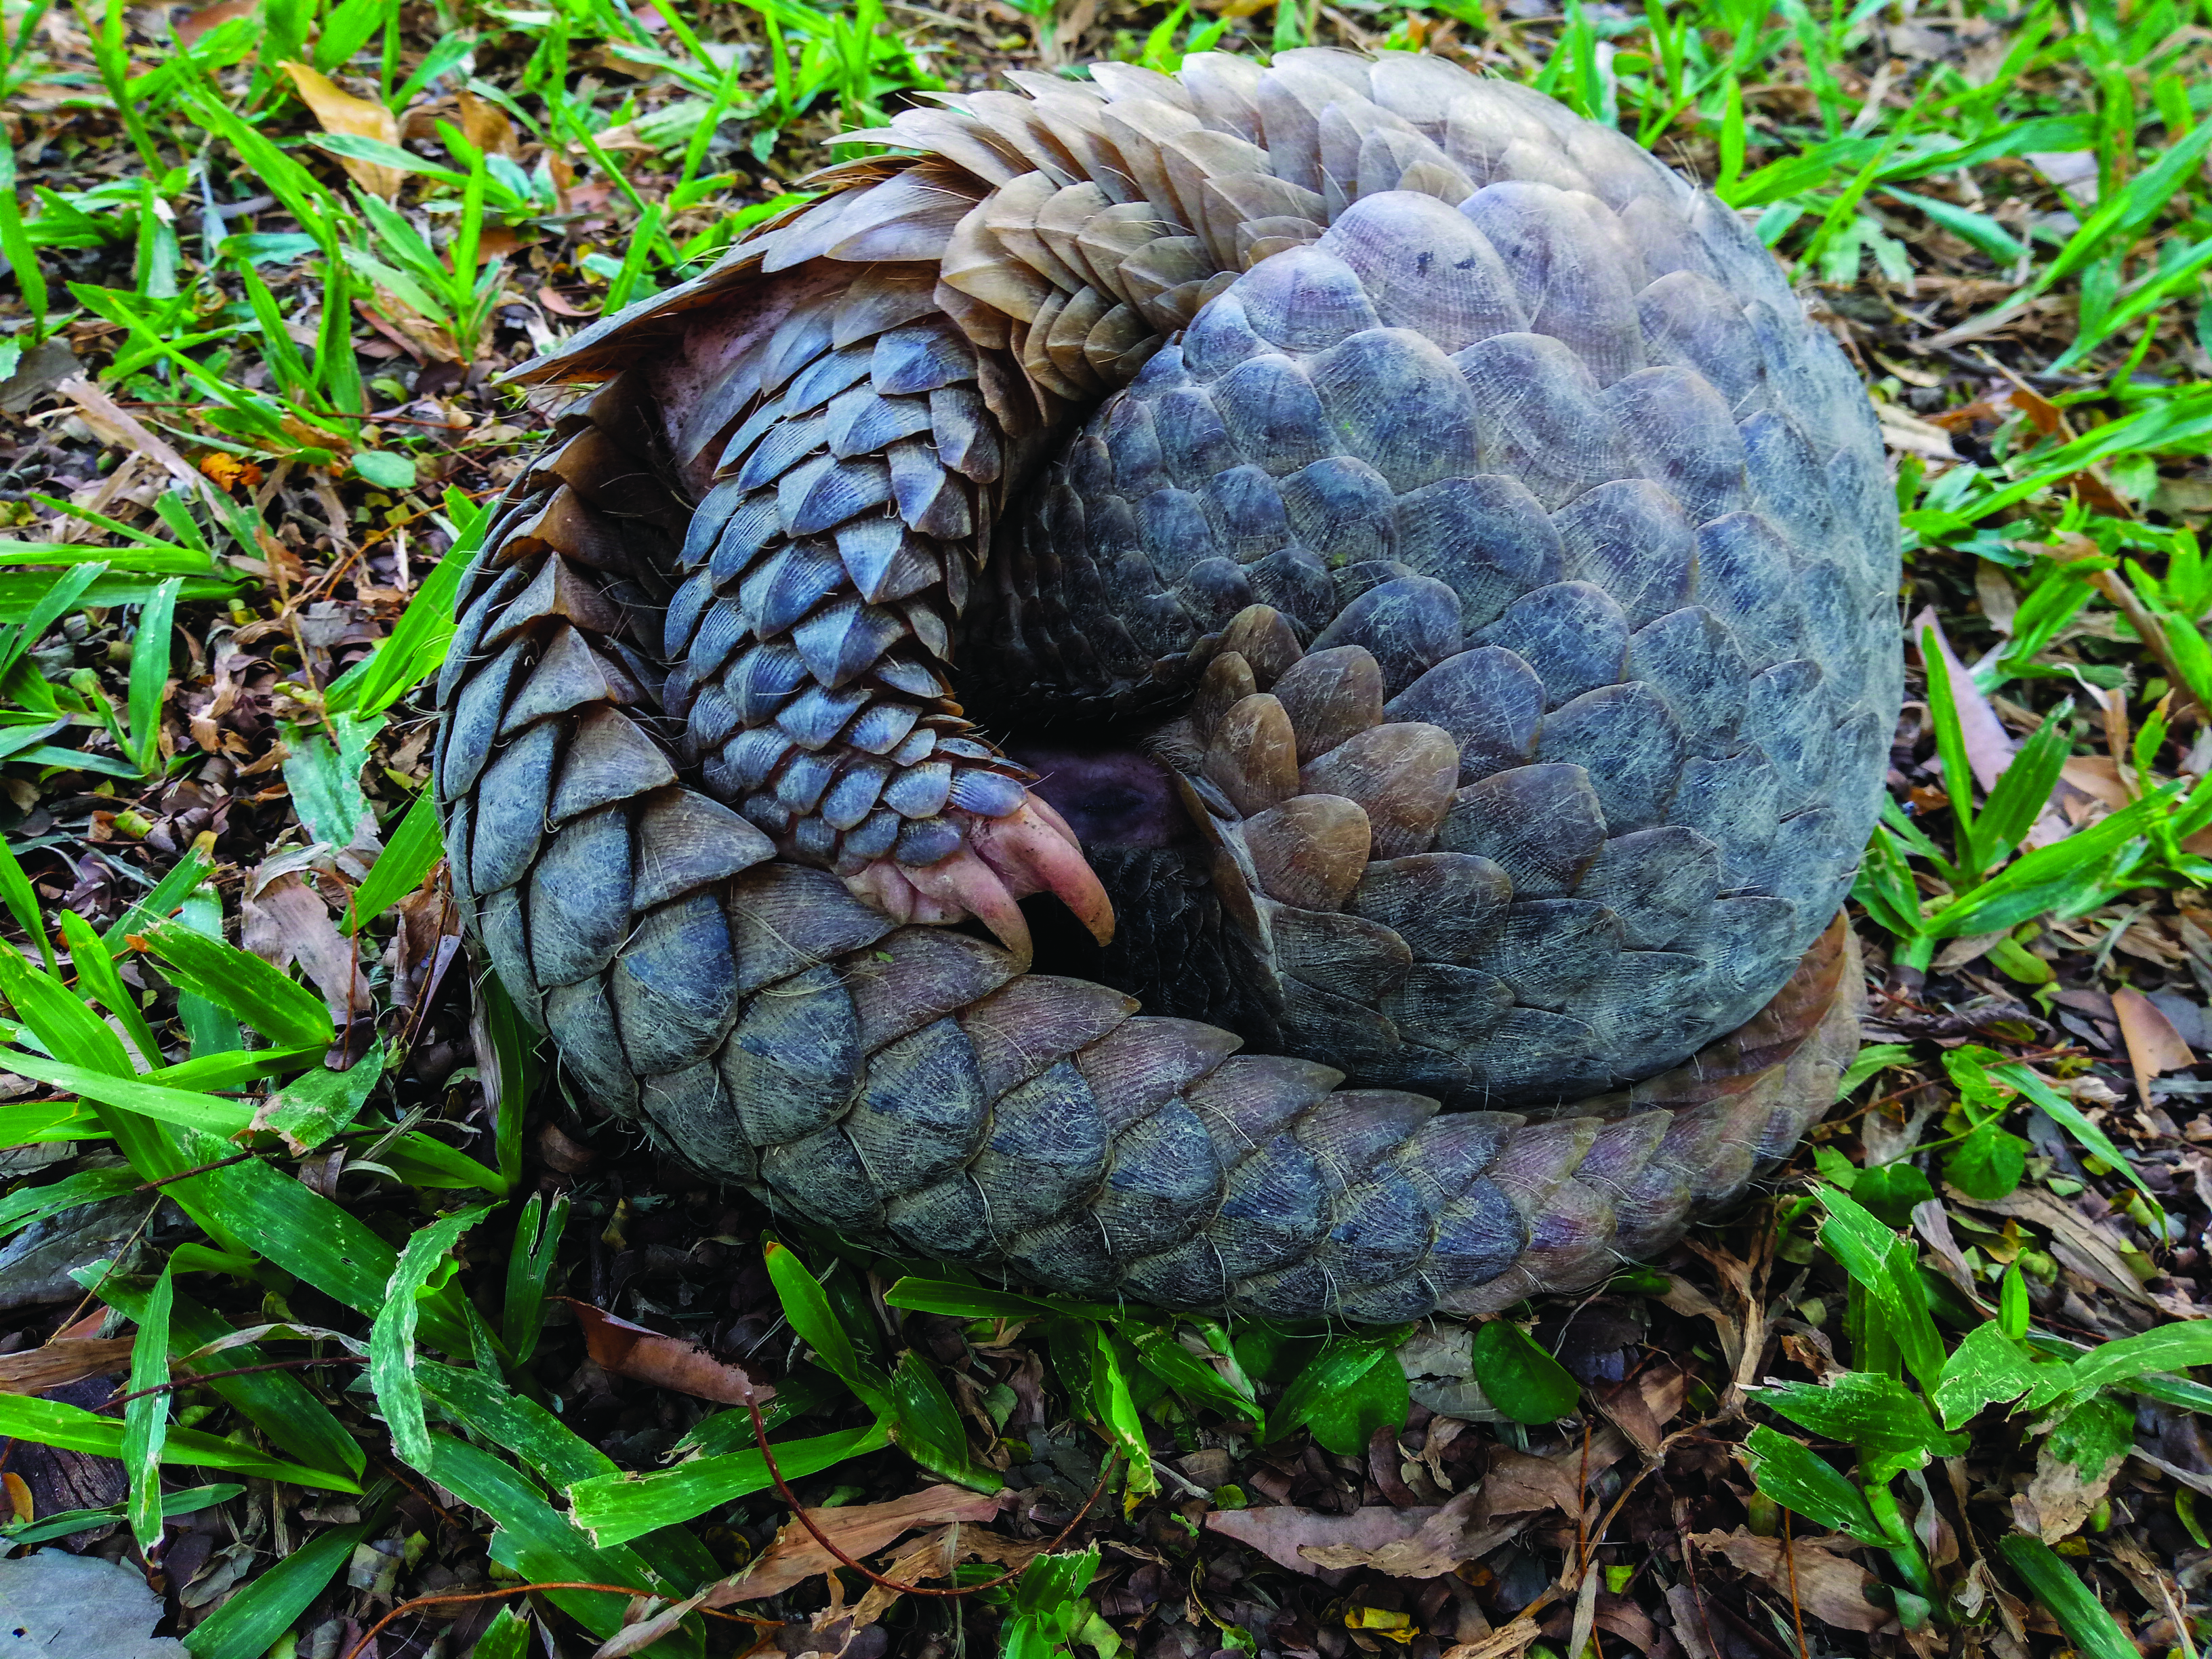 A picture of a pangolin rolled into a ball, showing only their protective scales as a defense mechanism.